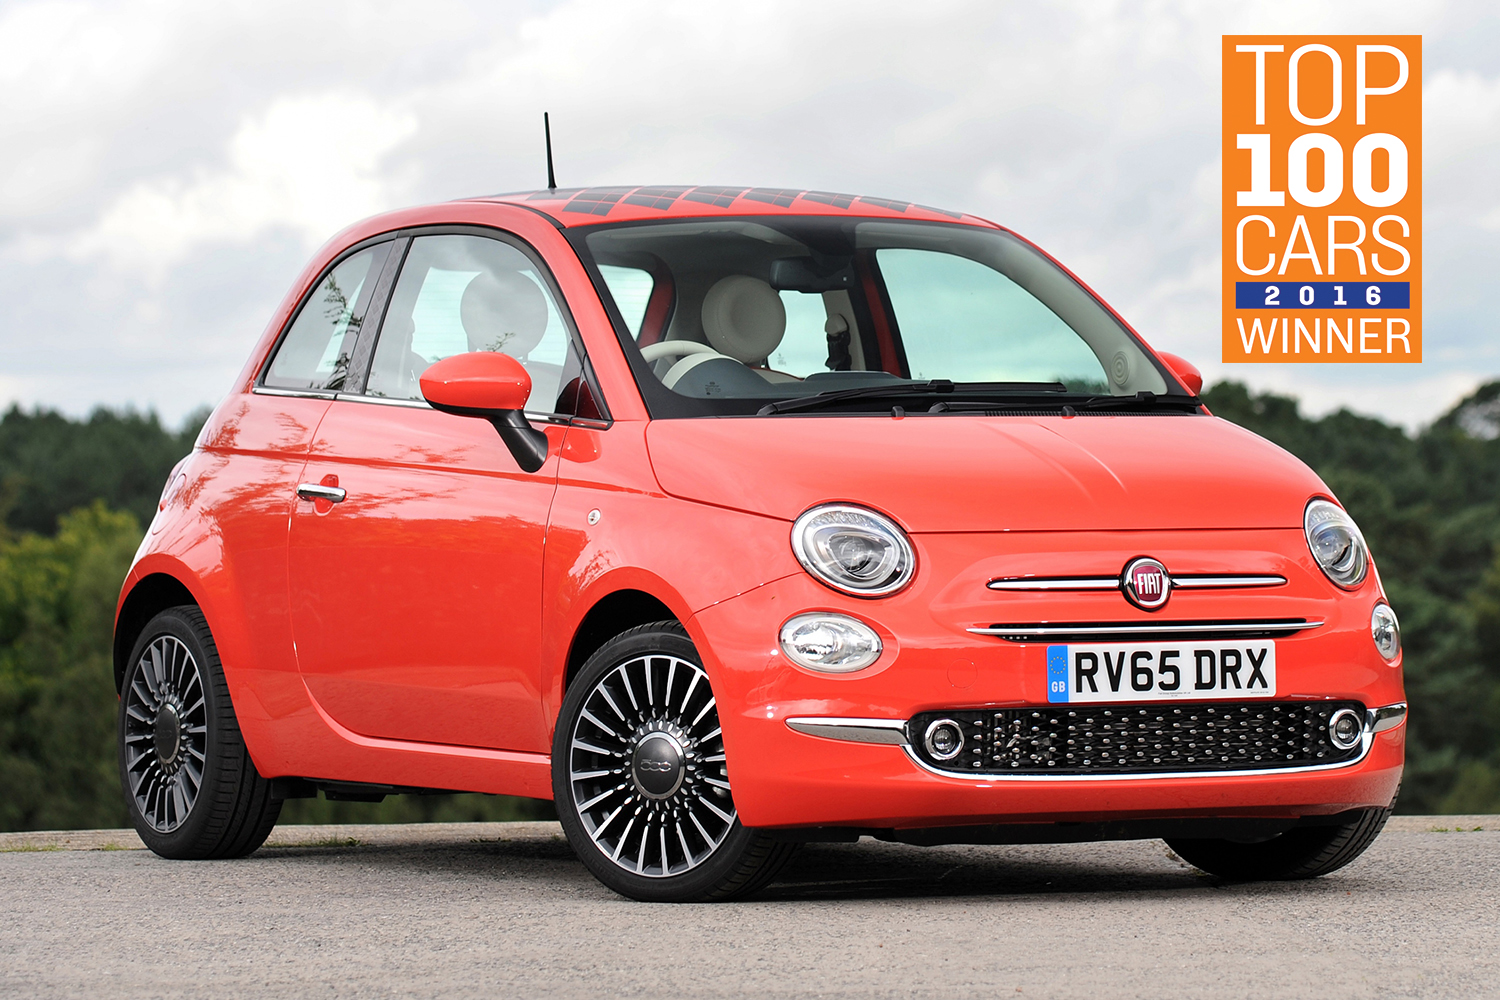 Fiat 500: The Sunday Times Top 100 Cars 2016 - Top 5 City cars